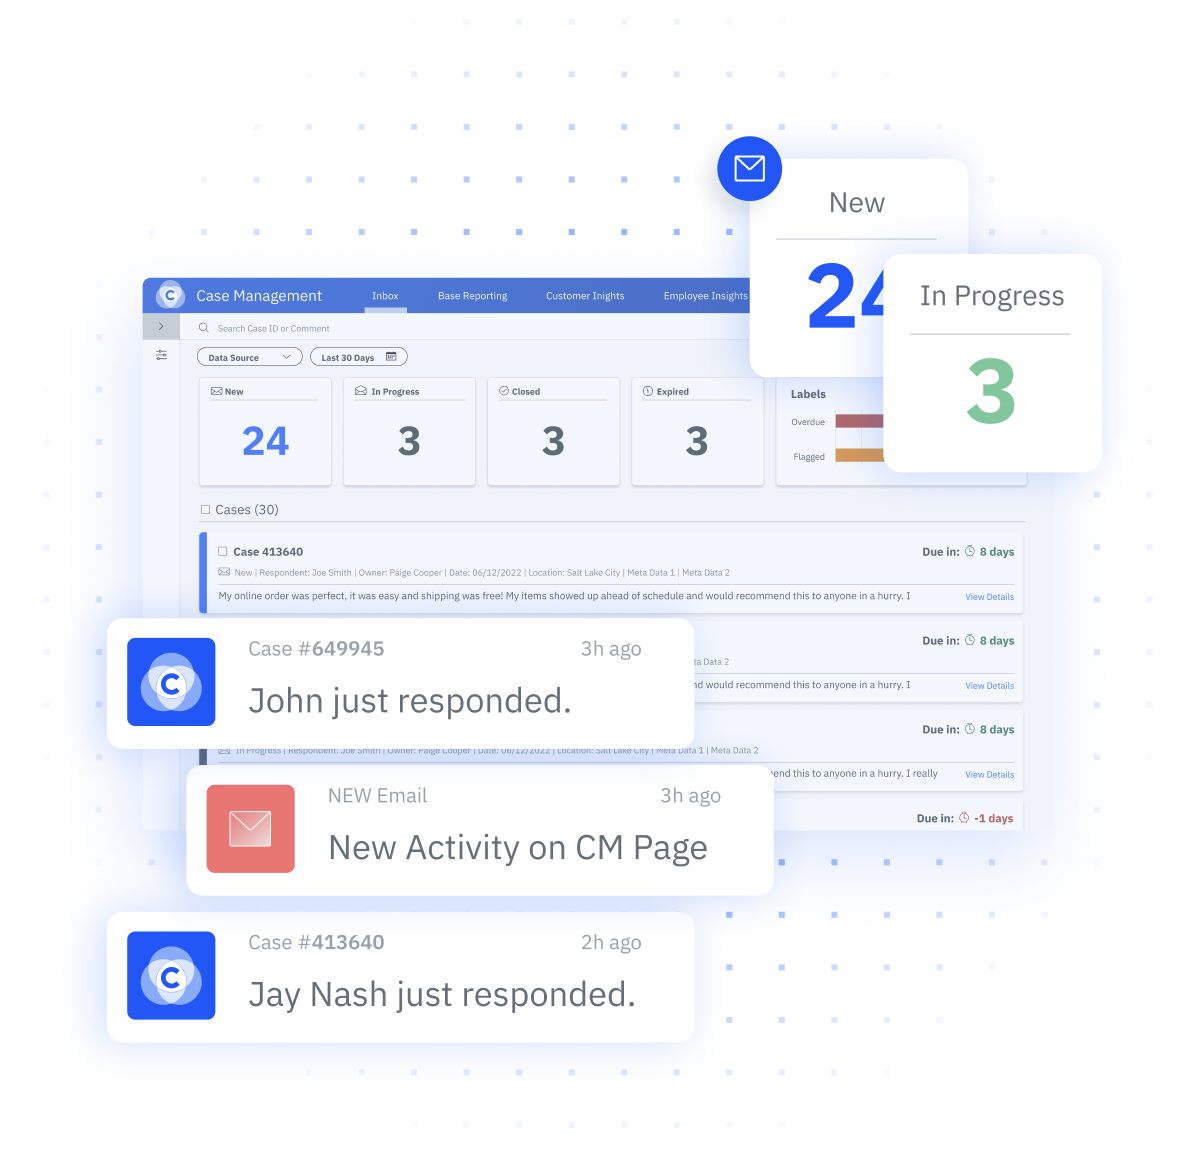 Accelerate and Automate Your Feedback Resolution: Create cases, receive real-time alerts and status updates and ensure issues are addressed immediately at every level. Seamless and open in-app communication makes handling cases easier than ever.